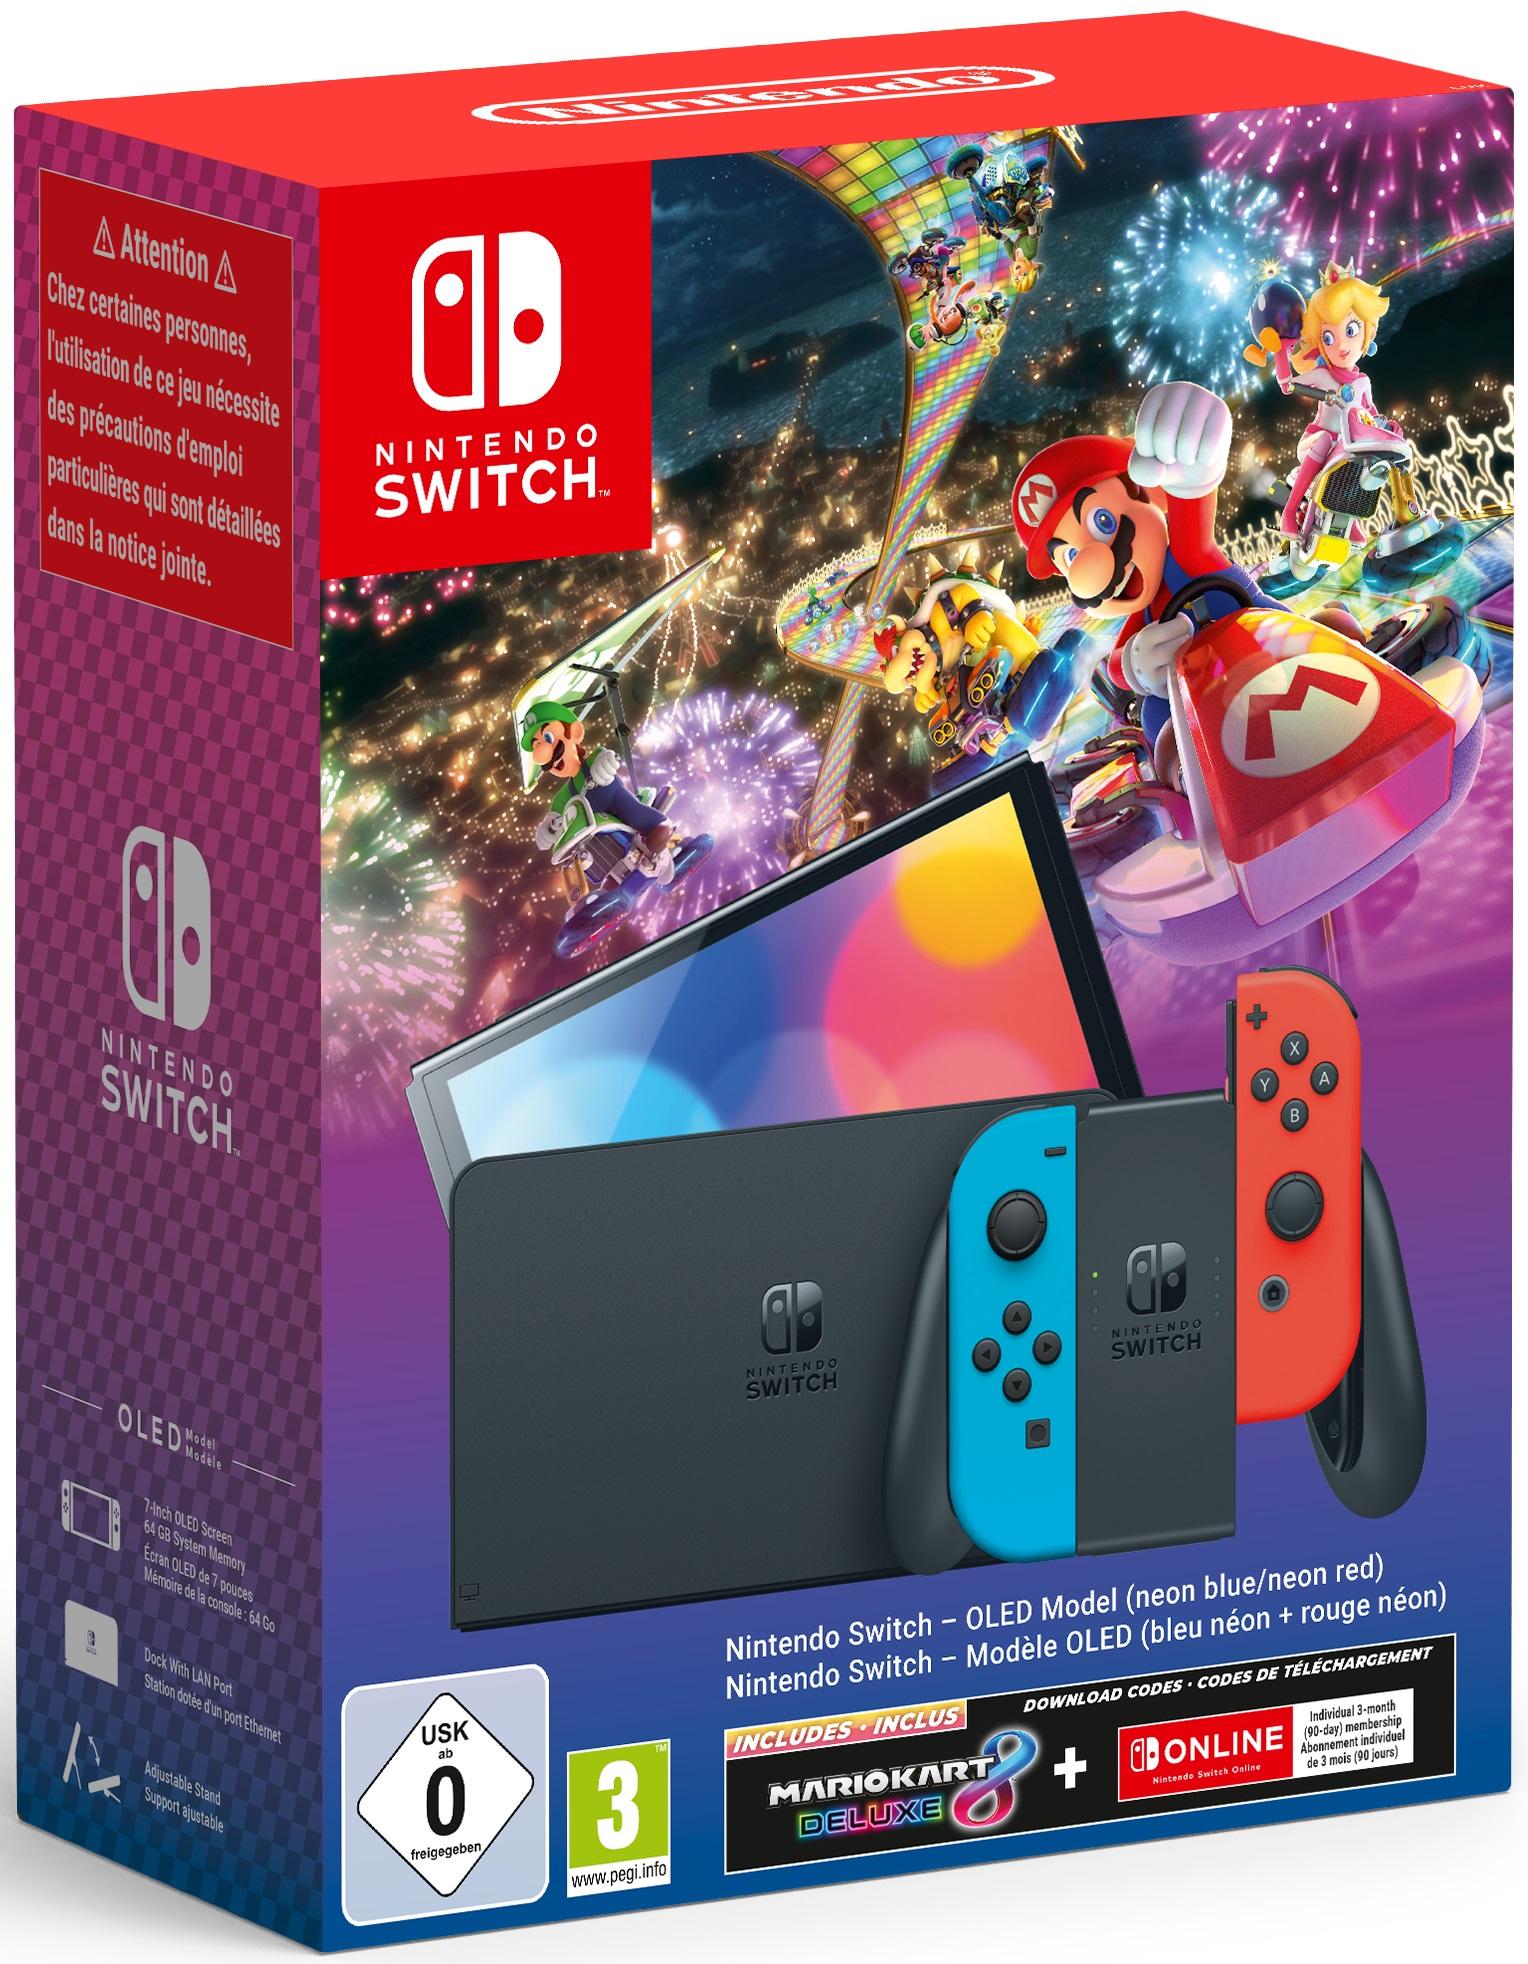 Nintendo Switch OLED - Neon Red & Neon Blue + Mario Kart 8 Deluxe Bundle + NSO